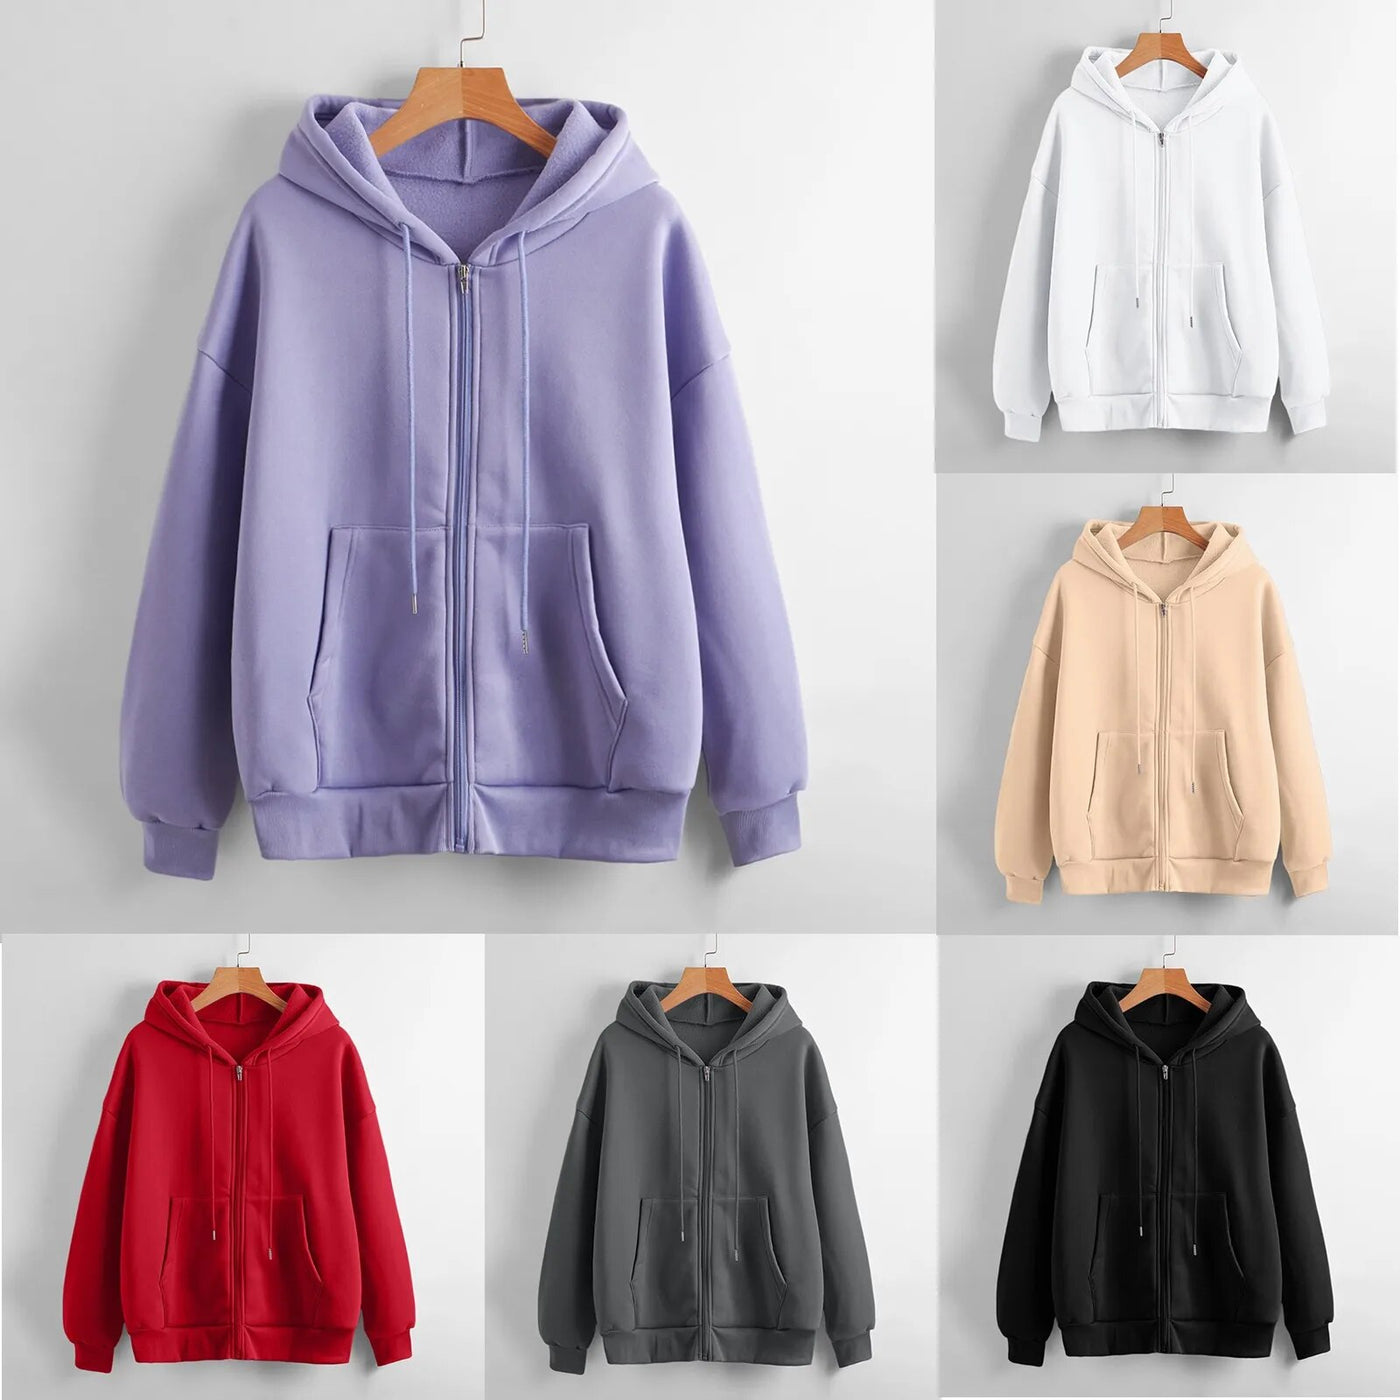 LIVIE - Loose Fitting Zipper Hoodie With Pockets